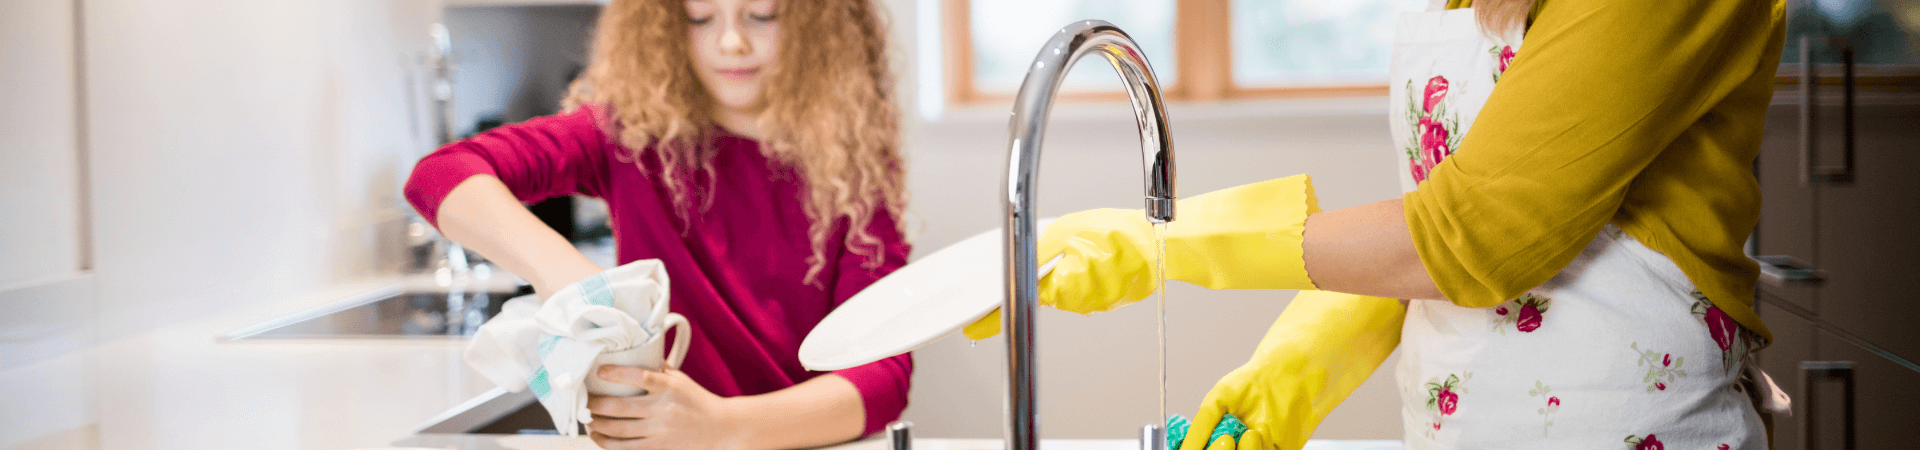 5 Cleaning Jobs Kids Can Do Around the Home